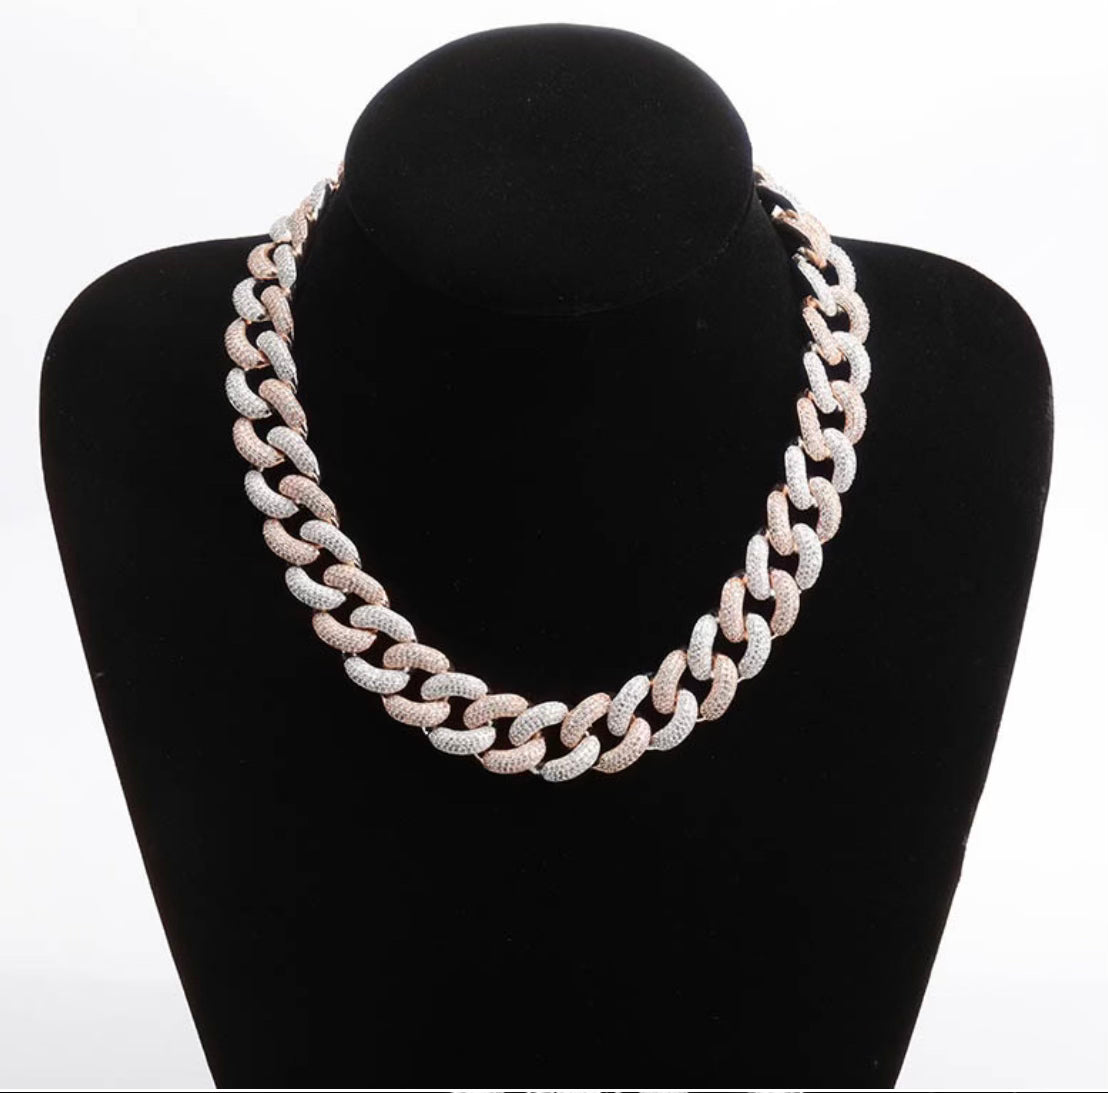 Two-Tone Iced Cuban Chain Link Necklace